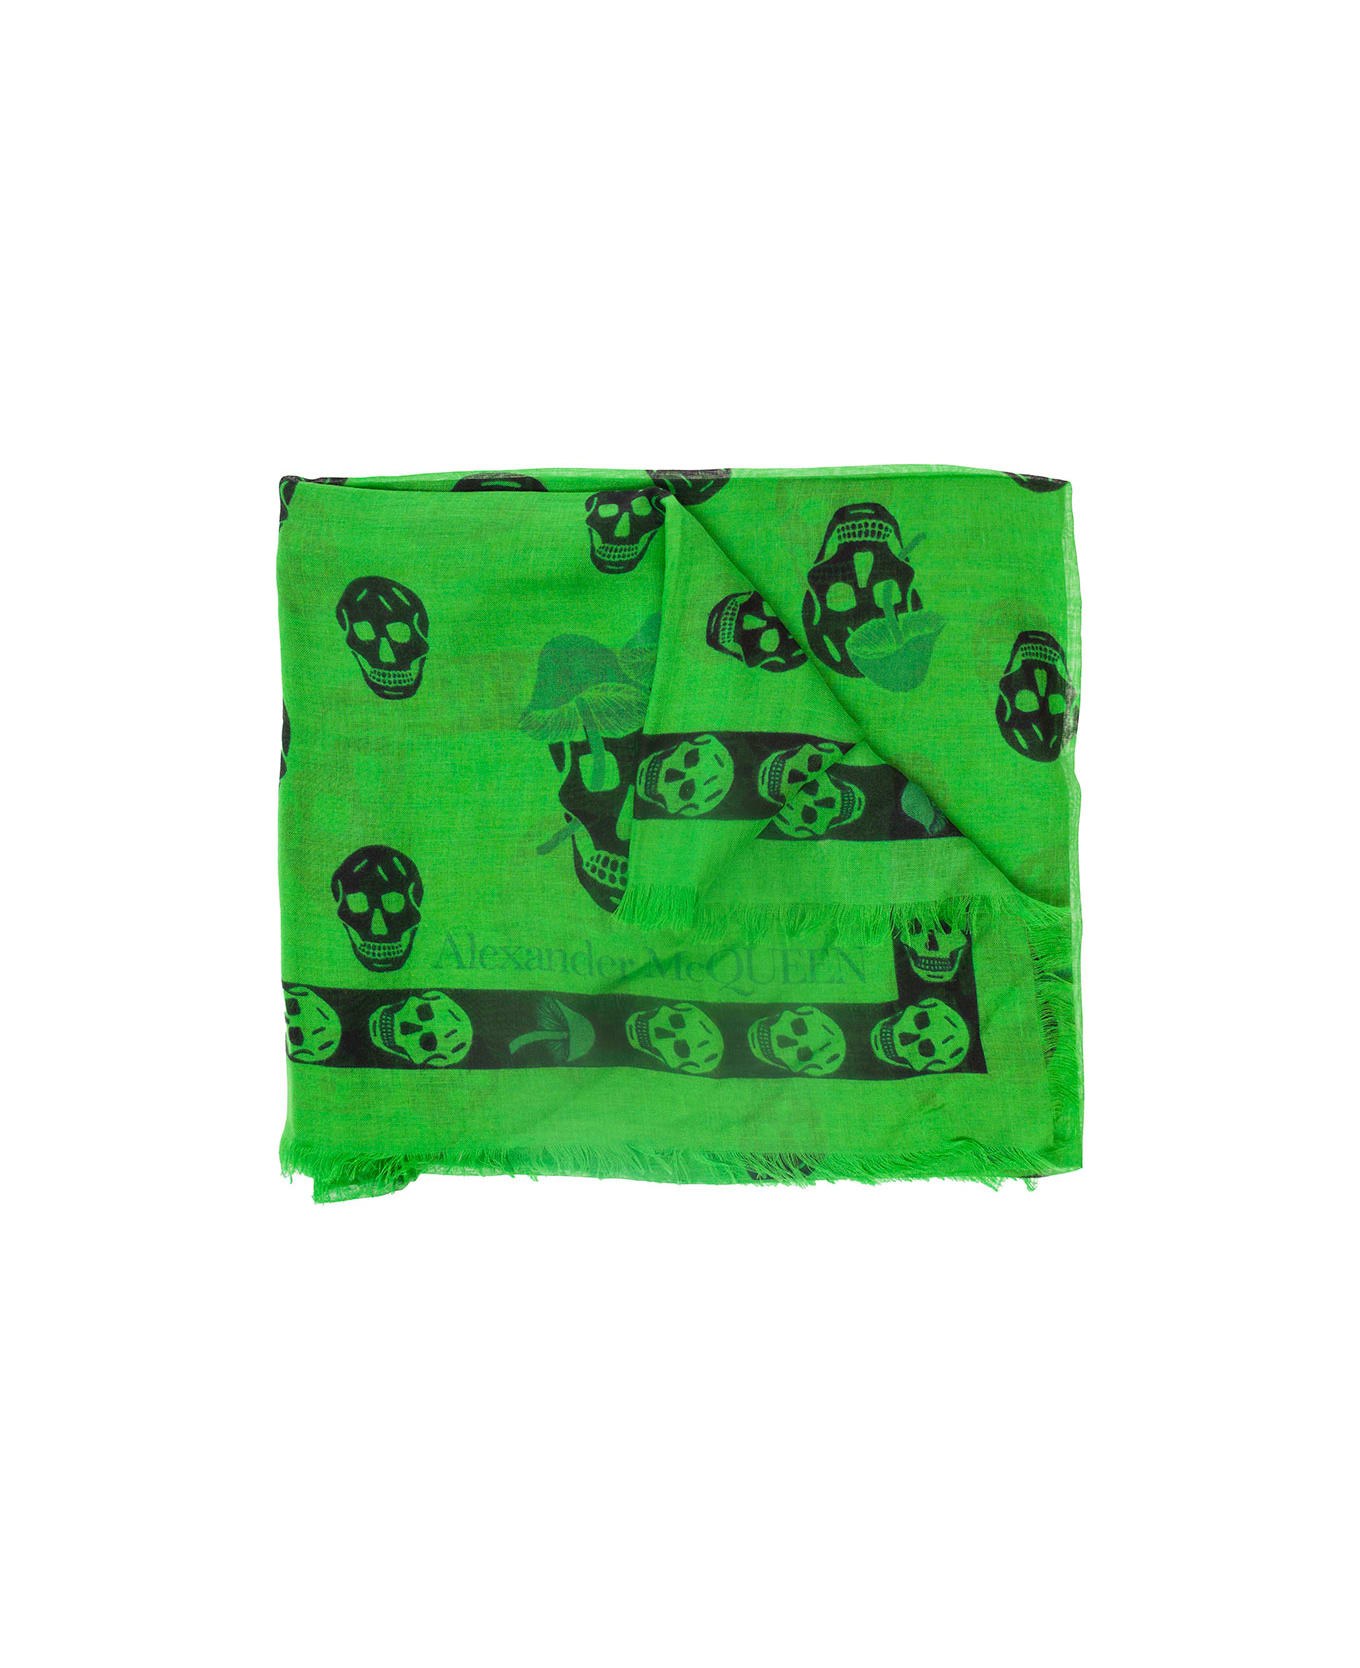 Alexander McQueen Green Scarf With Skull And Mushroom Print All-over In Modal Blend - Green